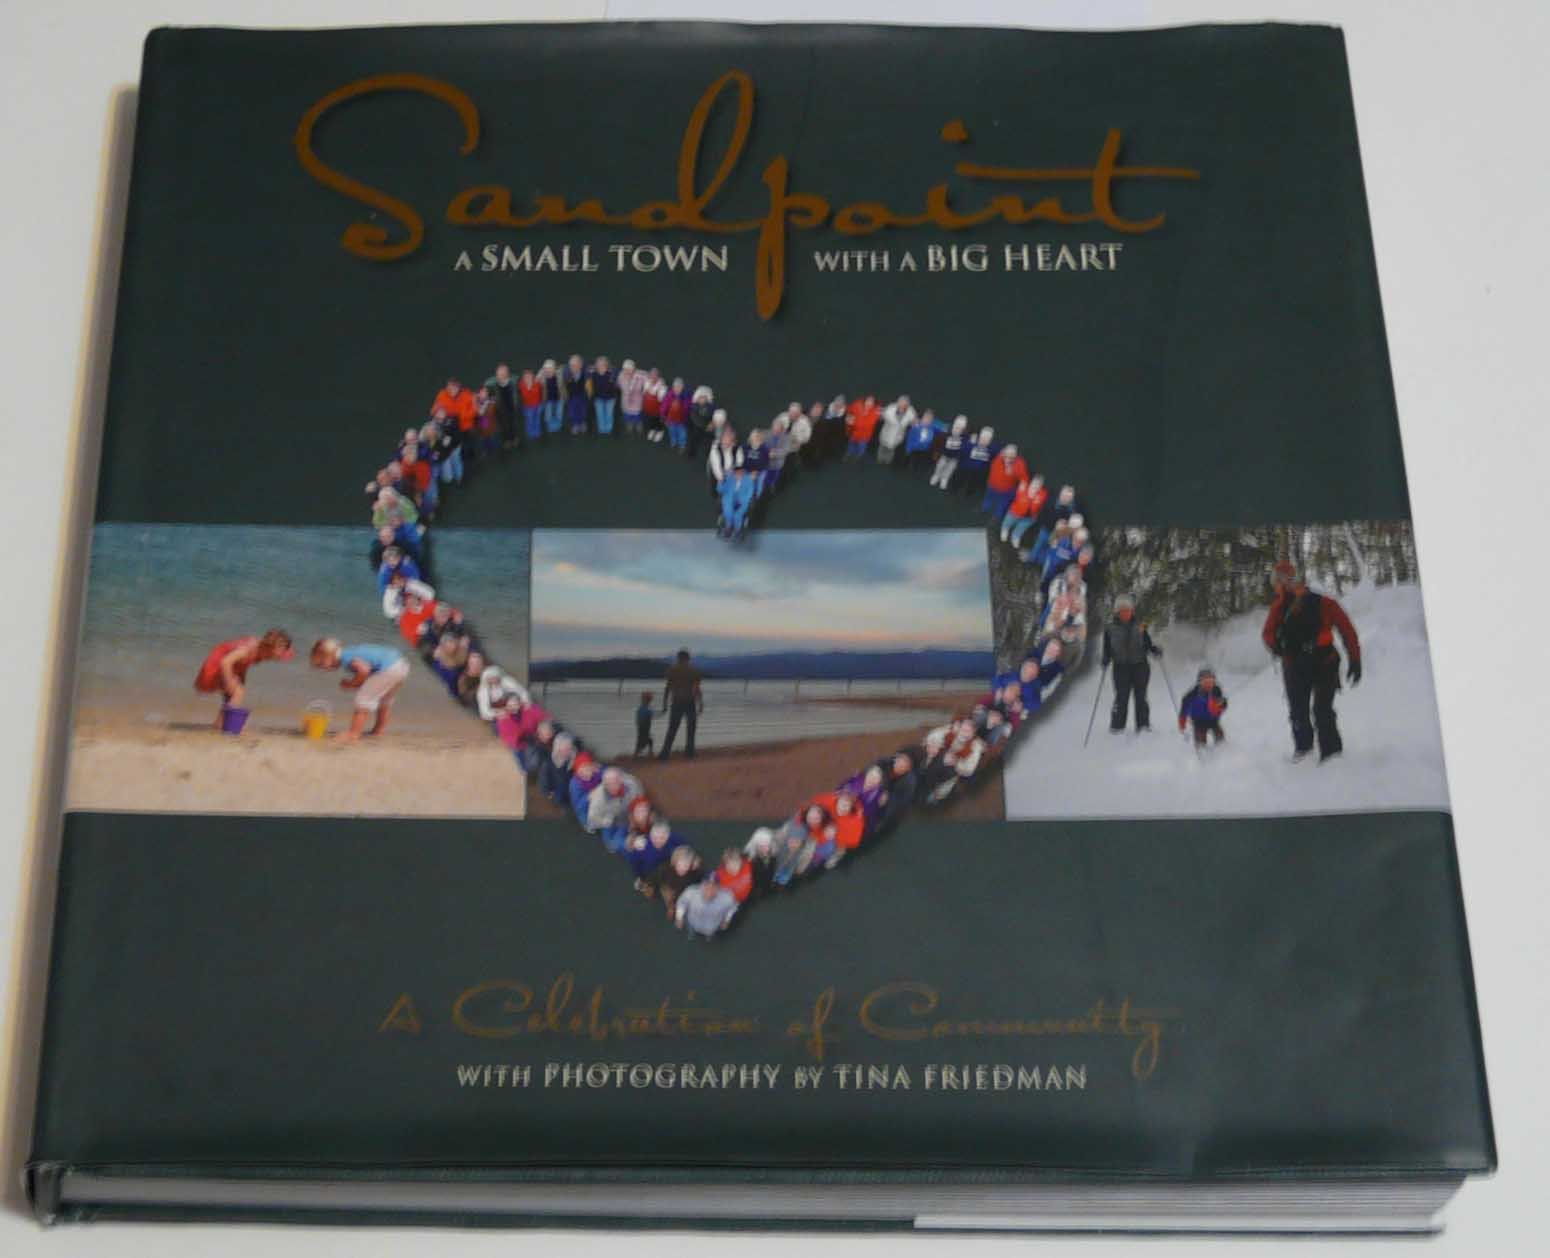 Sandpoint: A small town with a big heart : a celebration of community (book cover)